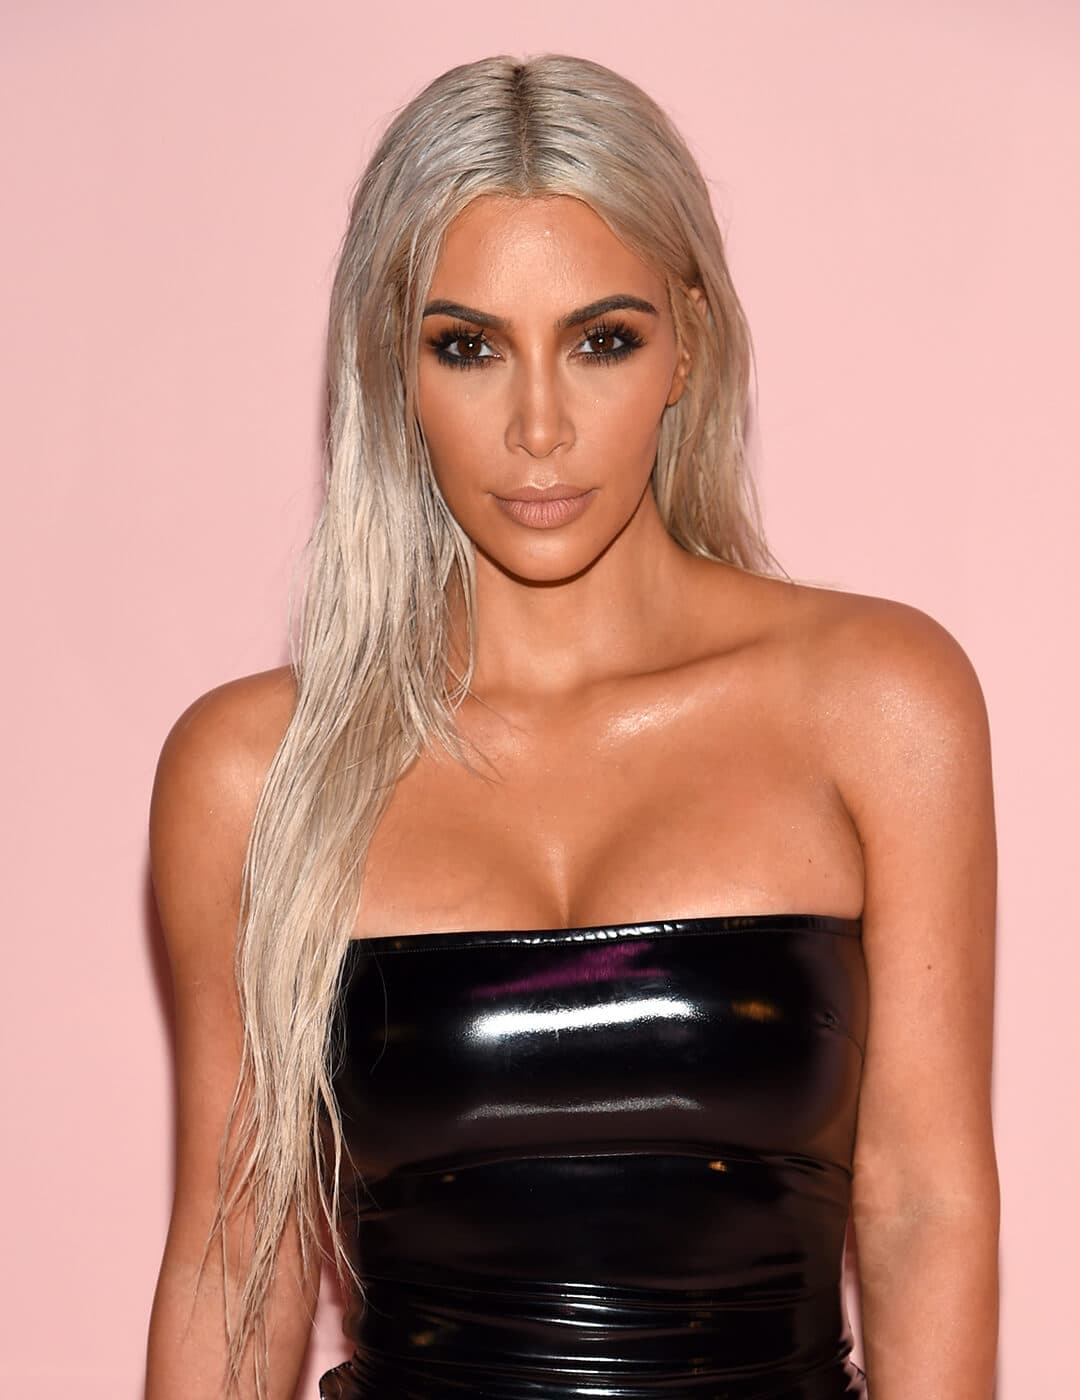 A photo of Kim Kardashian being sexy with a silver blonde hair color